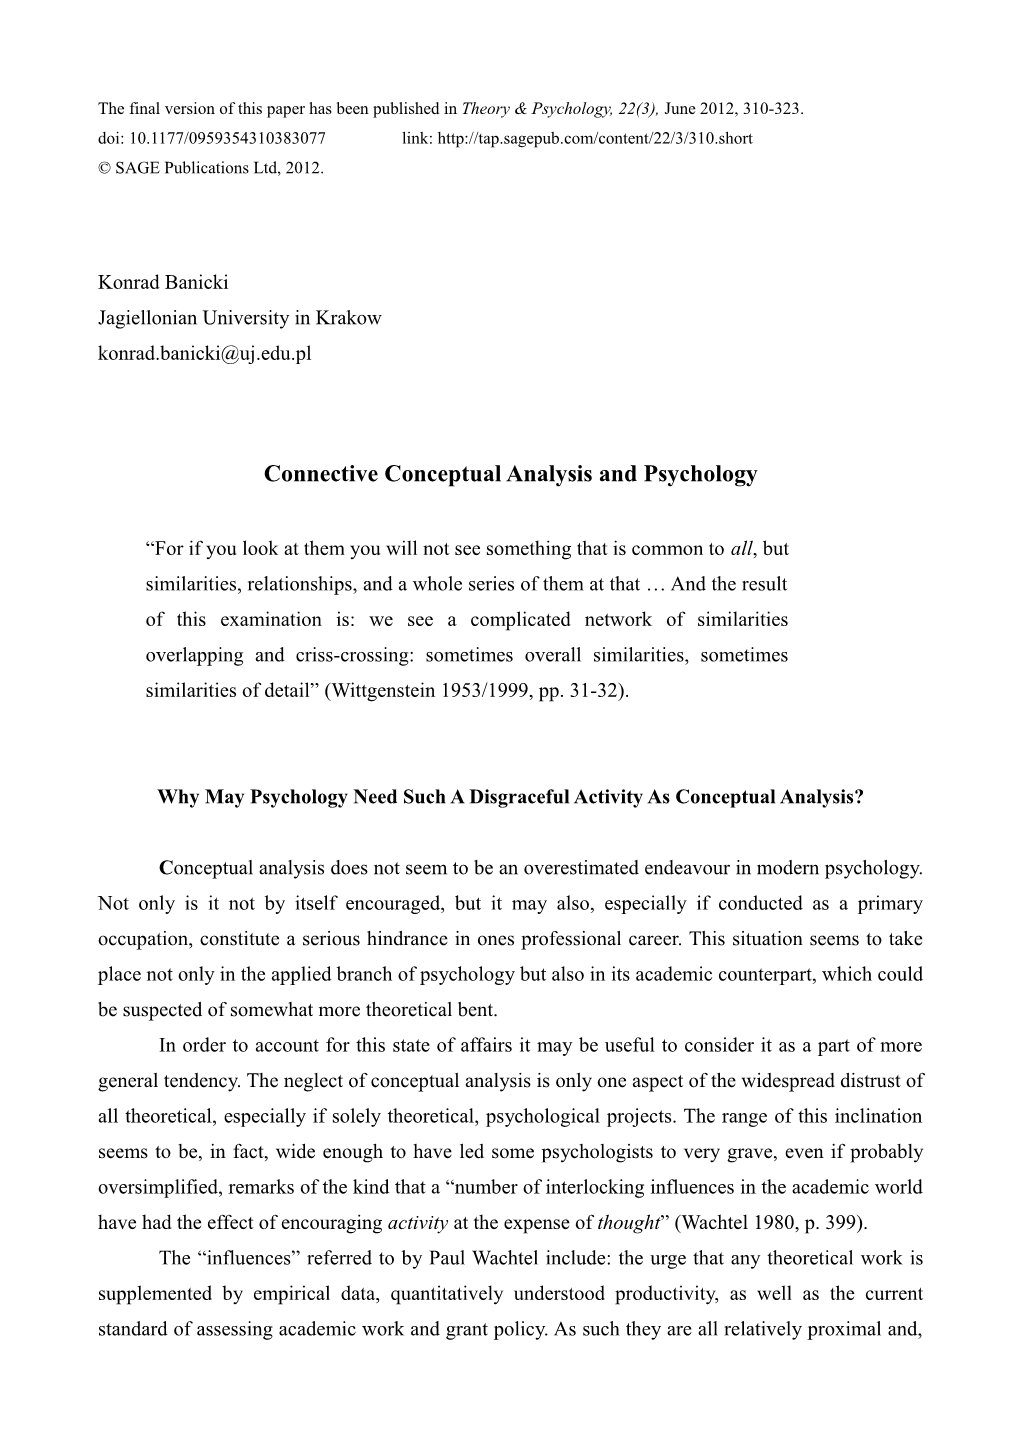 Connective Conceptual Analysis and Psychology